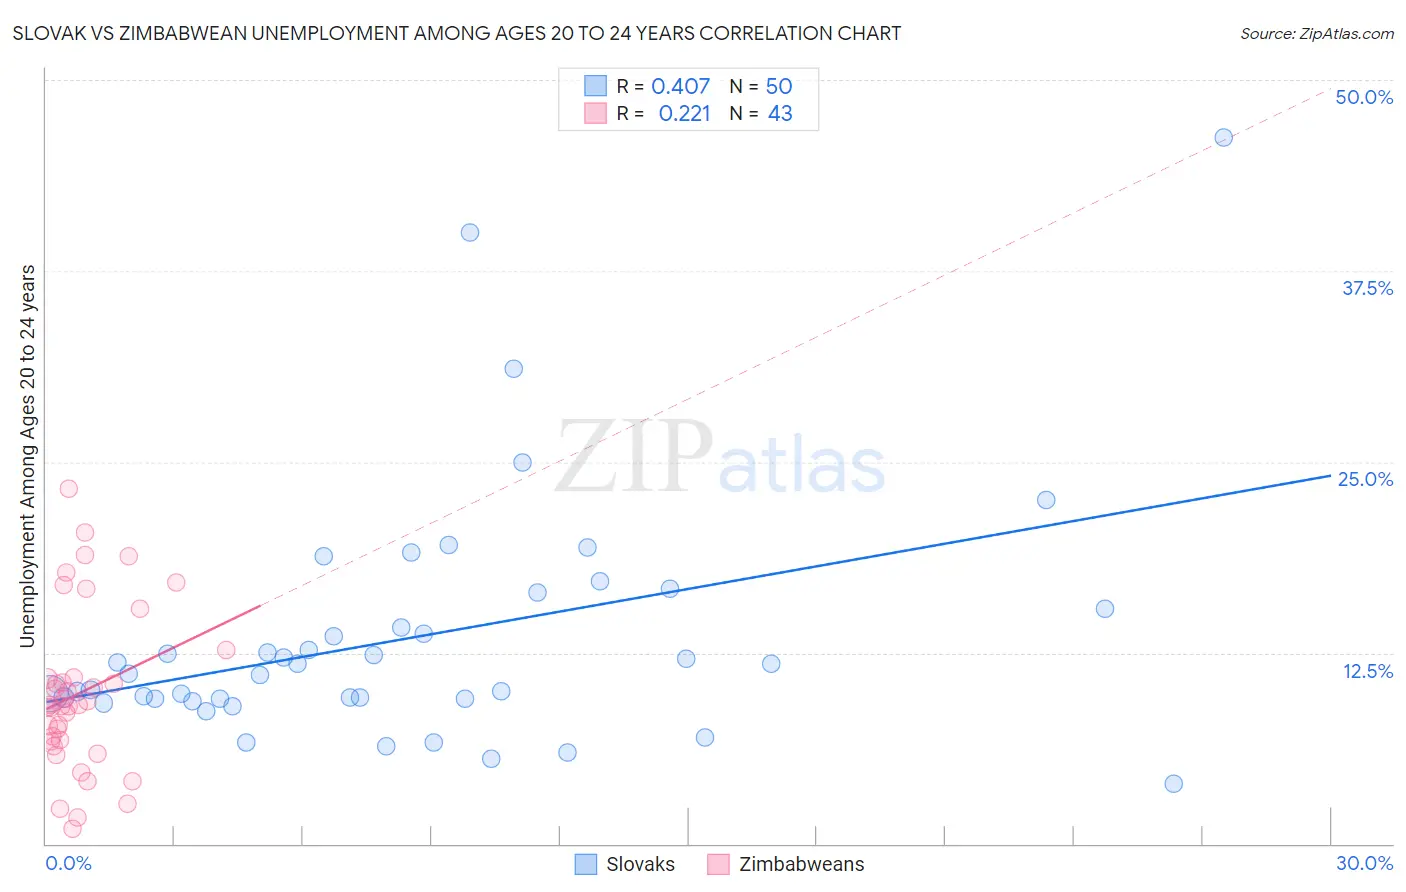 Slovak vs Zimbabwean Unemployment Among Ages 20 to 24 years